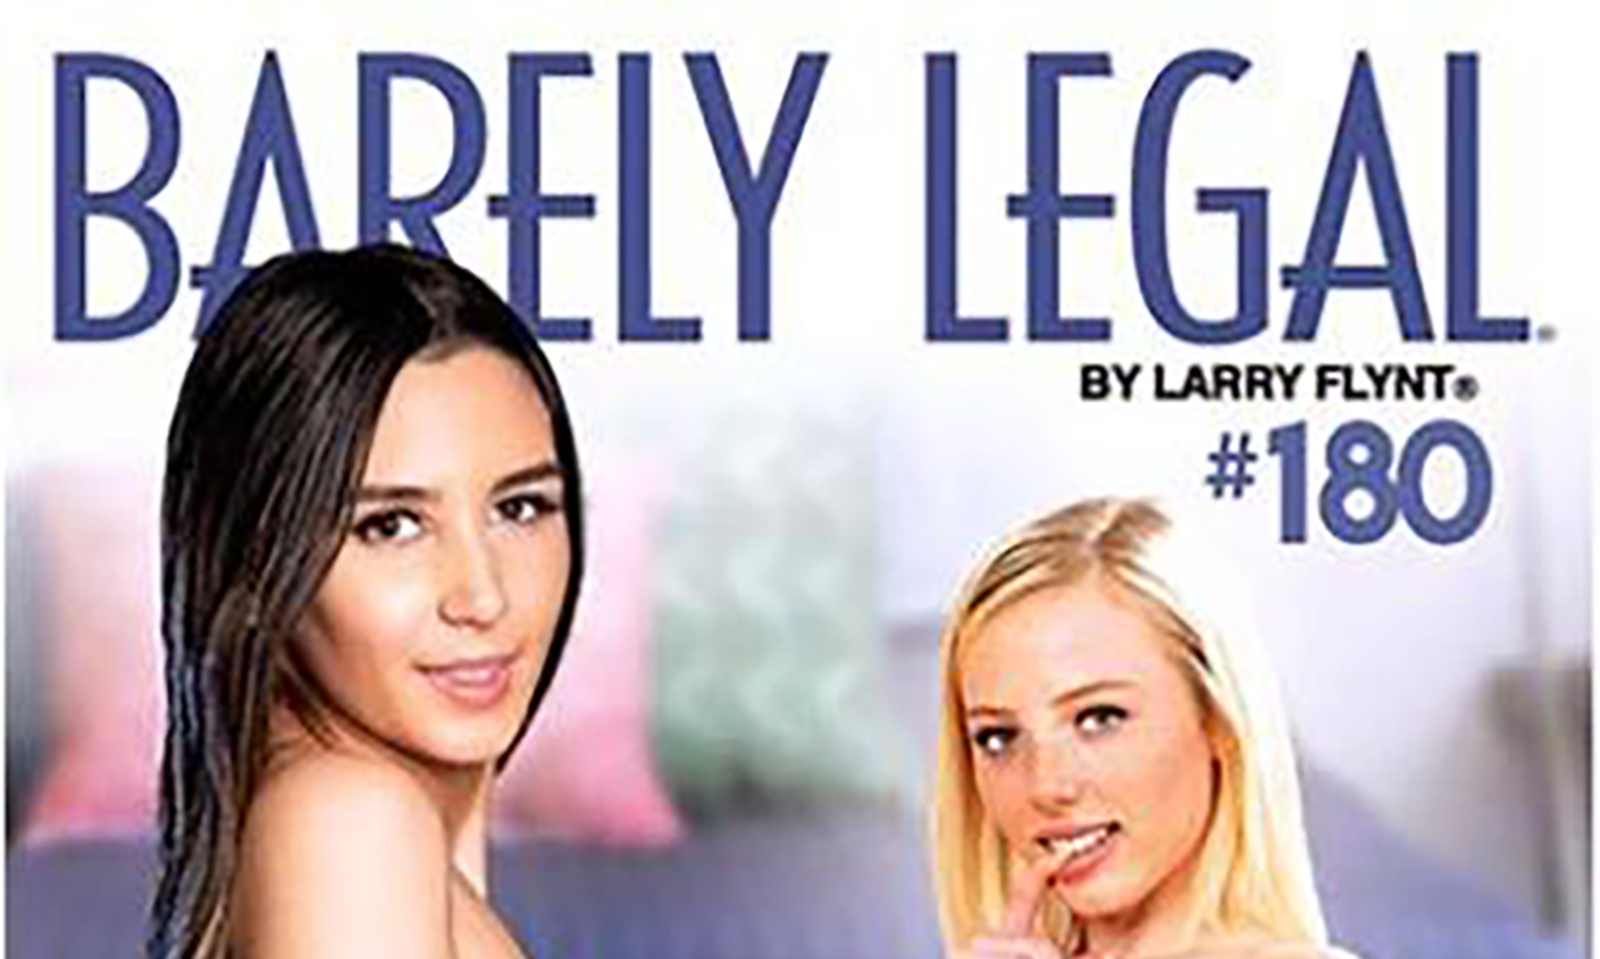 Natalia Nix and Dixie Lynn Share the Cover of  'Barely Legal 180'